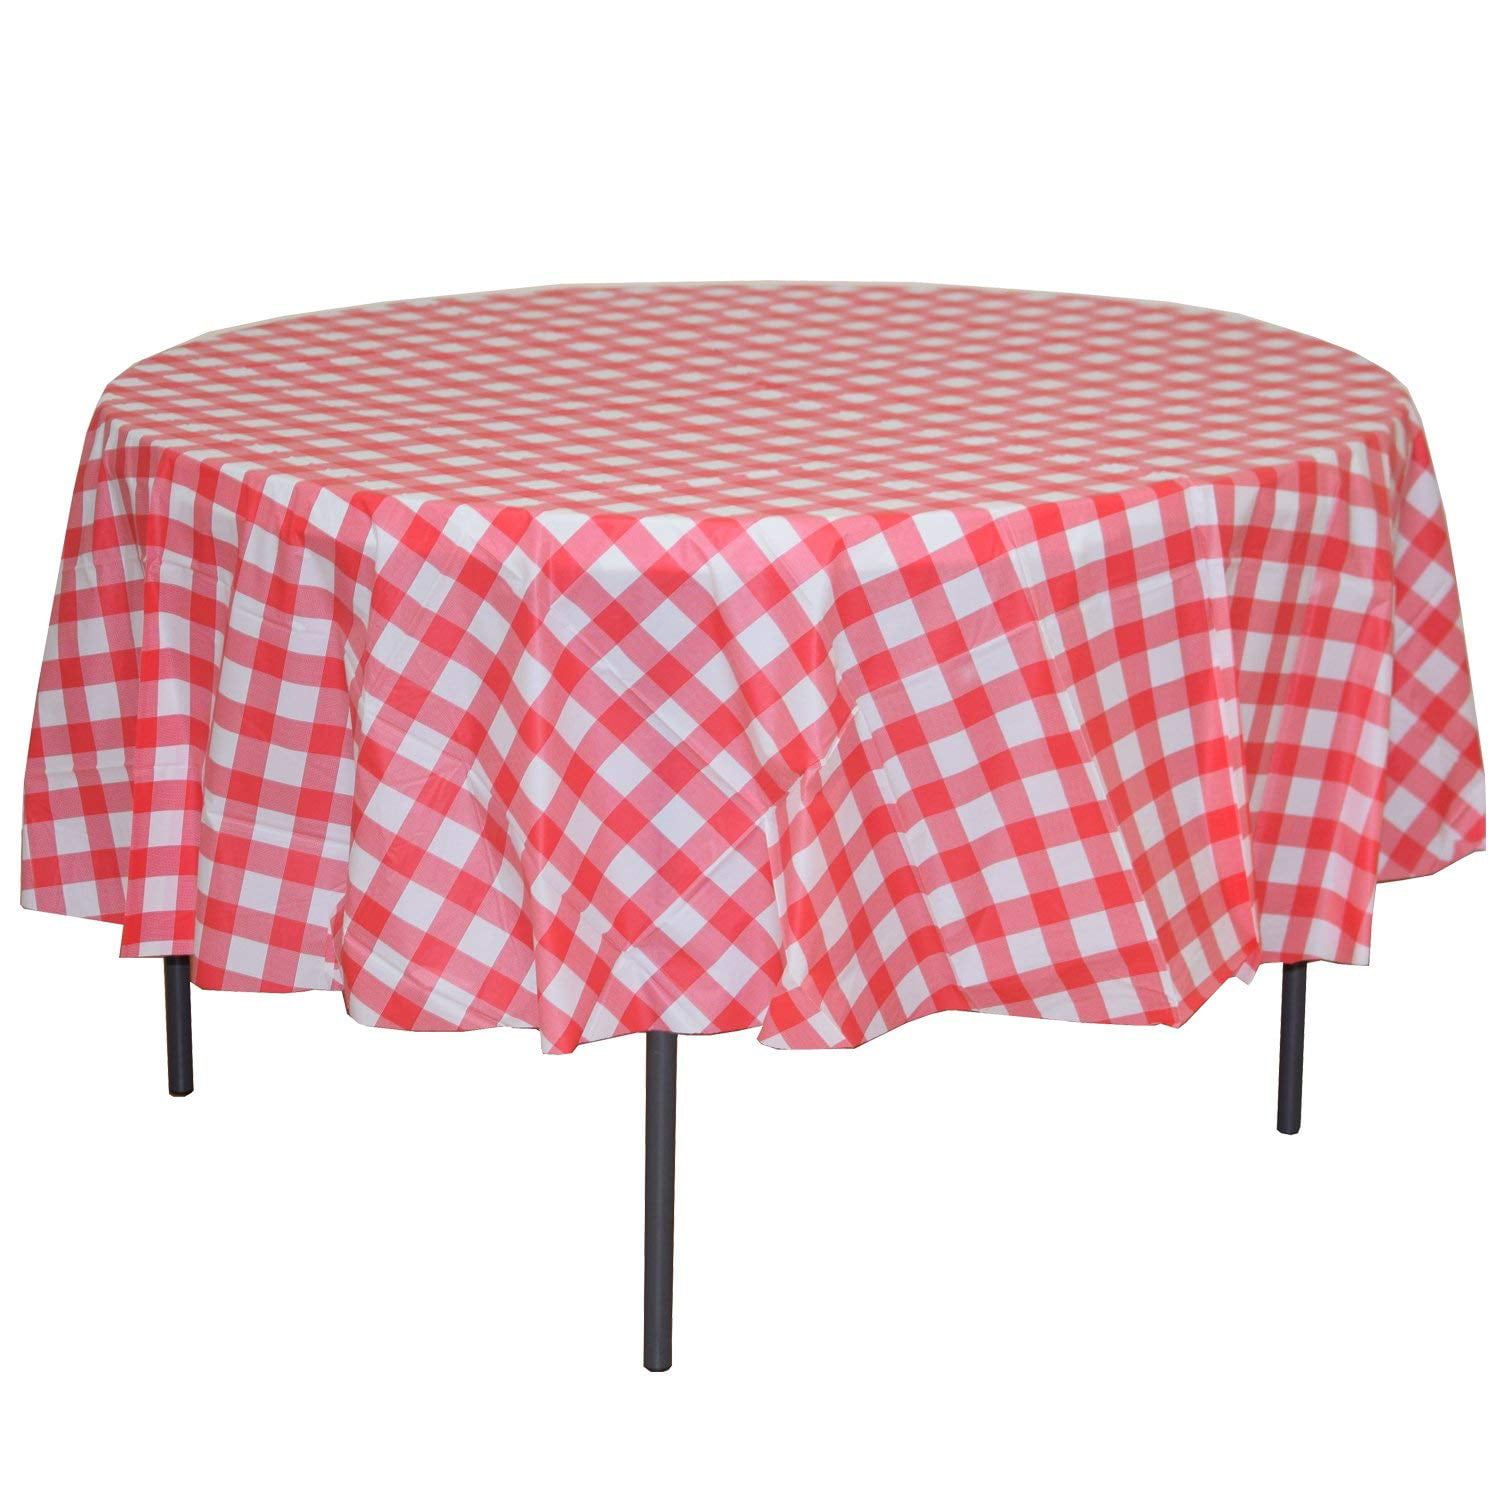 Premium 12 Pack Red & White Gingham Plastic Tablecloth, 84